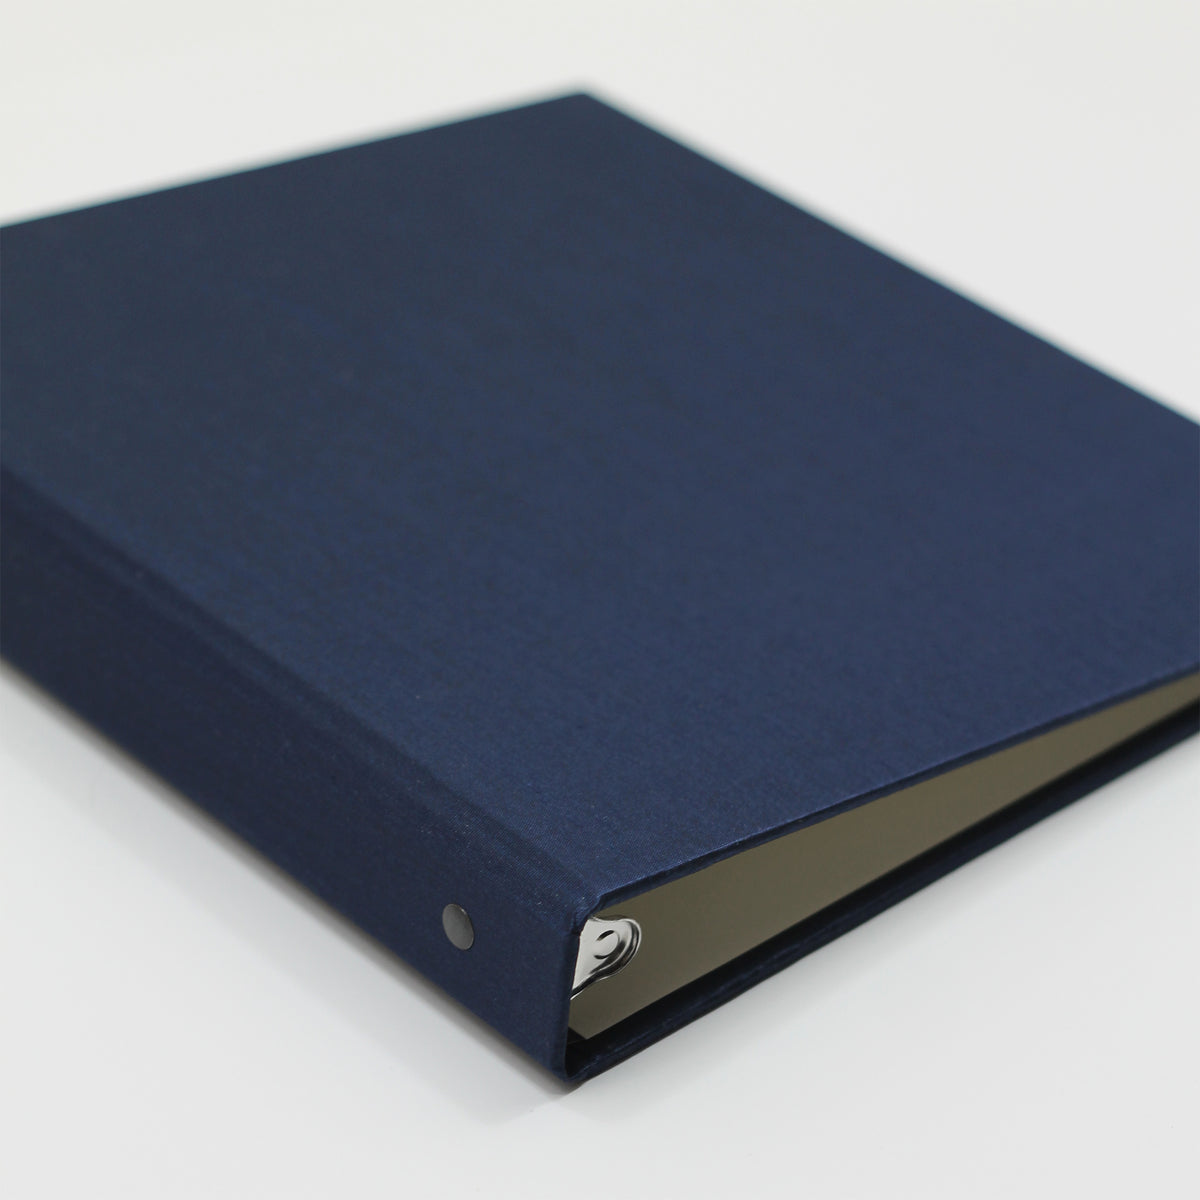 Storage Binder for Photos or Documents with Navy Silk Cover